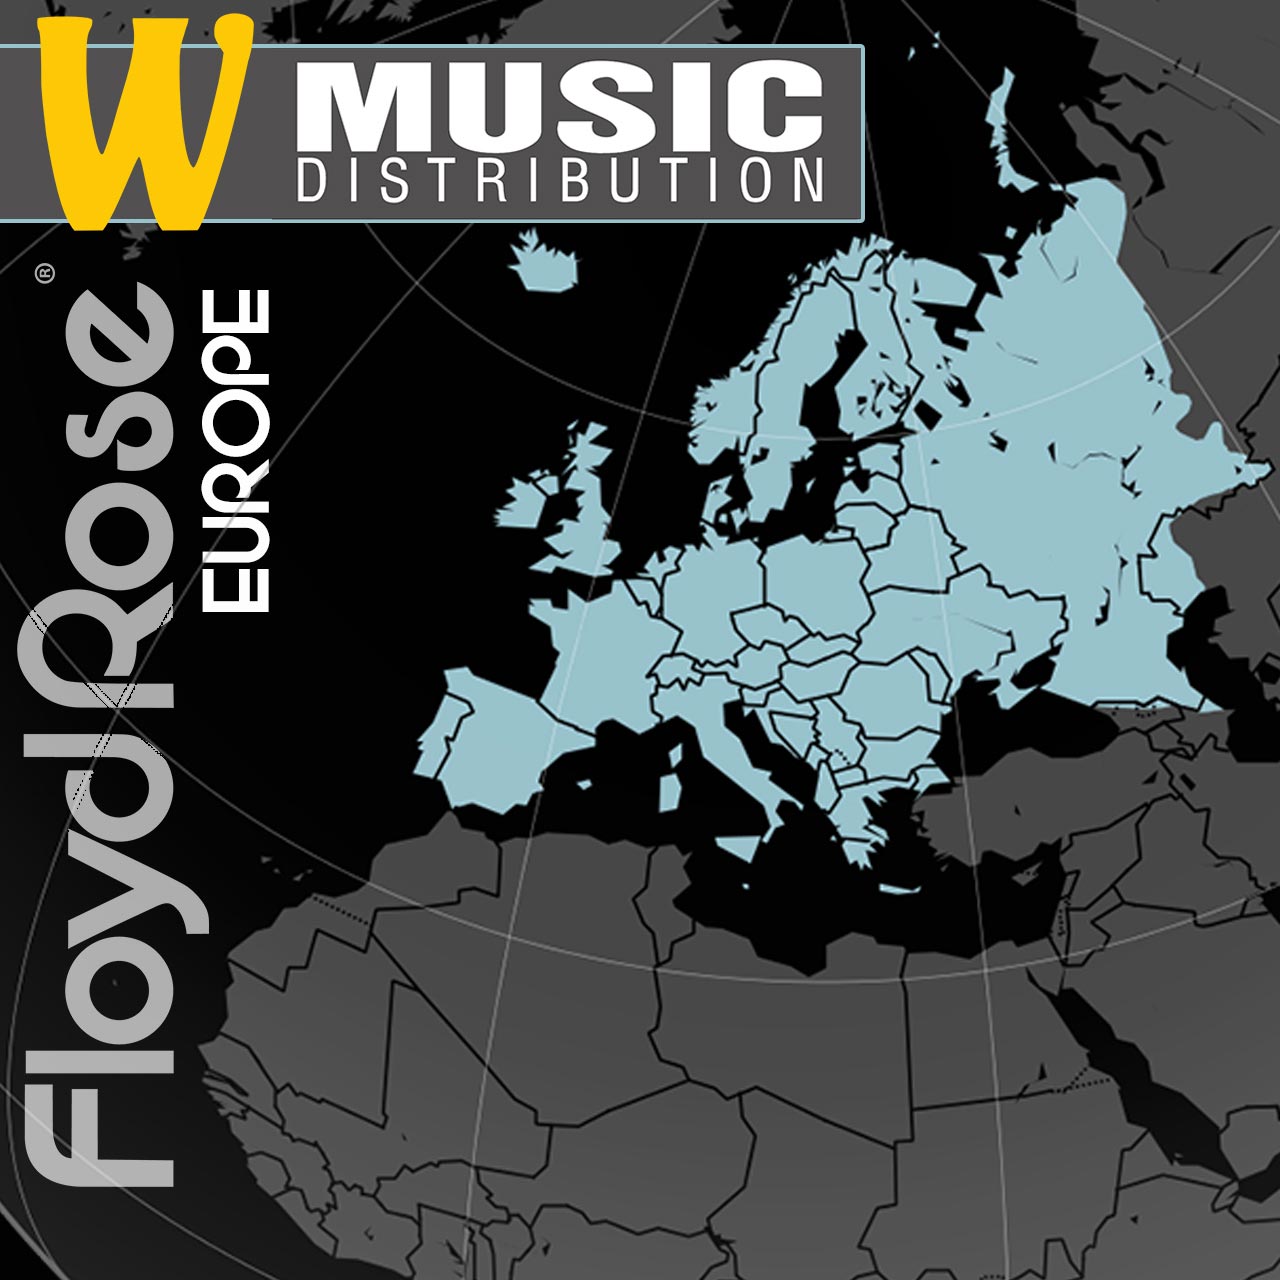 AP International Music Supply Announces W-Music Distribution Exclusivity for Floyd Rose in Europe